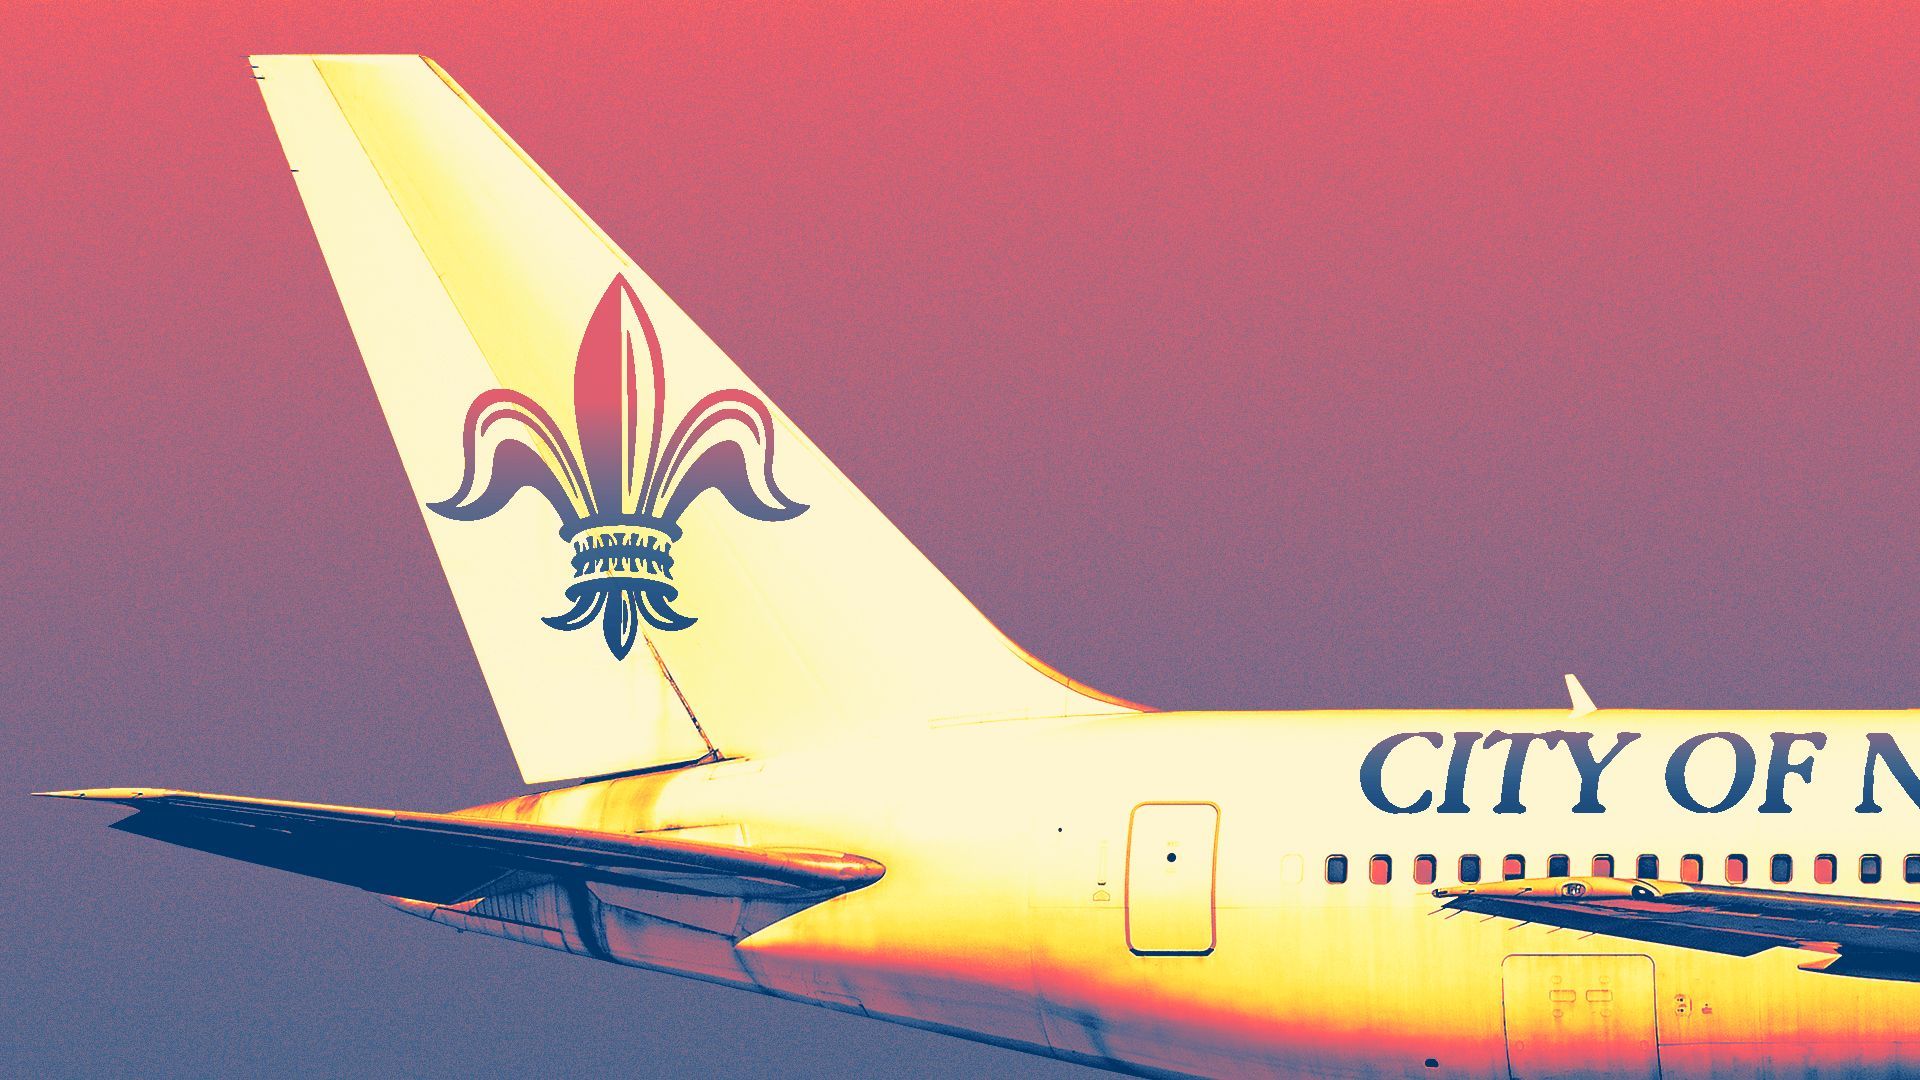 Illustration of a plane with the City of New Orleans logo on its tail, and the words CITY OF NEW ORLEANS on the side.